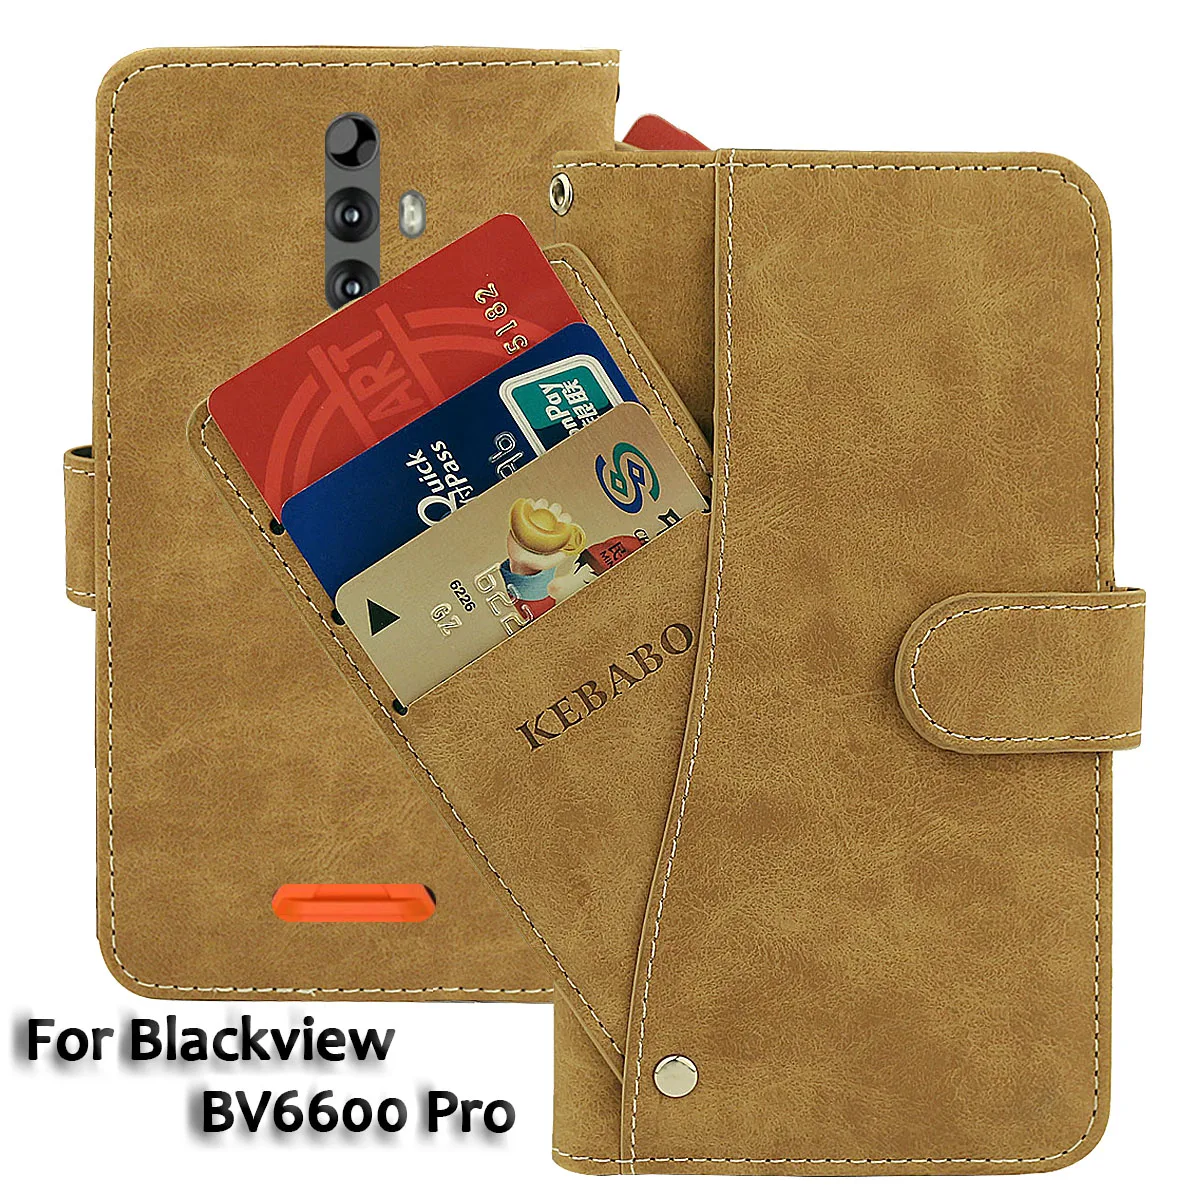 

Vintage Leather Wallet Blackview BV6600 Pro Case 5.7" Flip Luxury Card Slots Cover Magnet Phone Protective Cases Bags